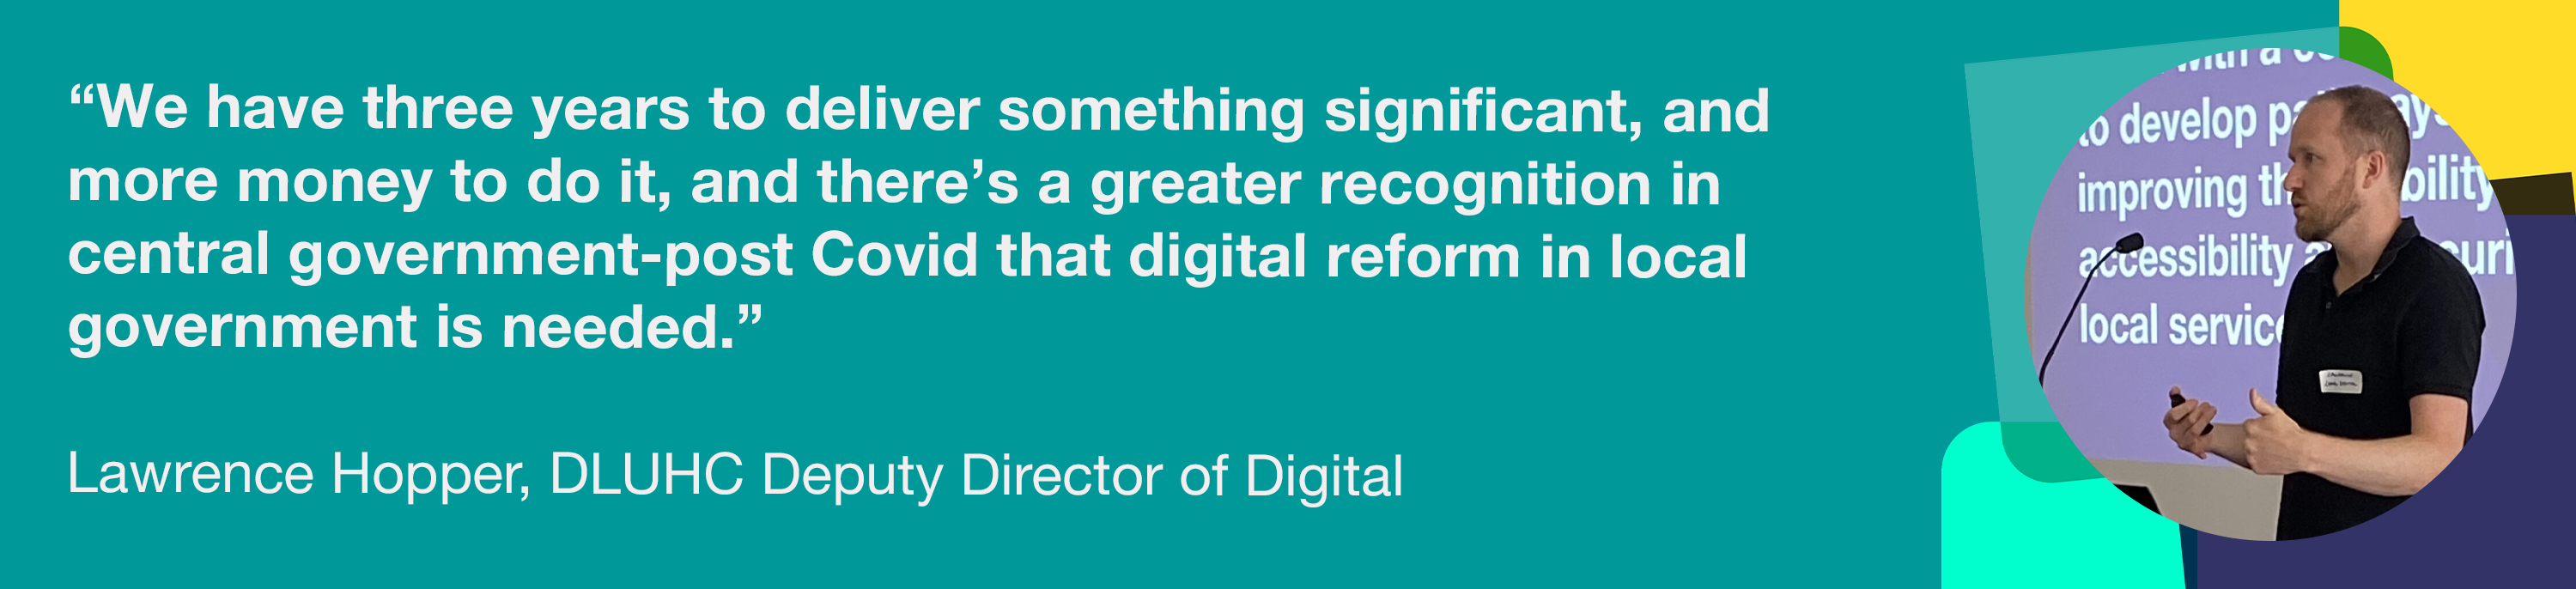 'We have three years to deliver something significant, and more money to do it. There's a greater recognition in central government that digital reform in local government is needed.' - Lawrence Hopper, DLUHC Deputy Director of Digital